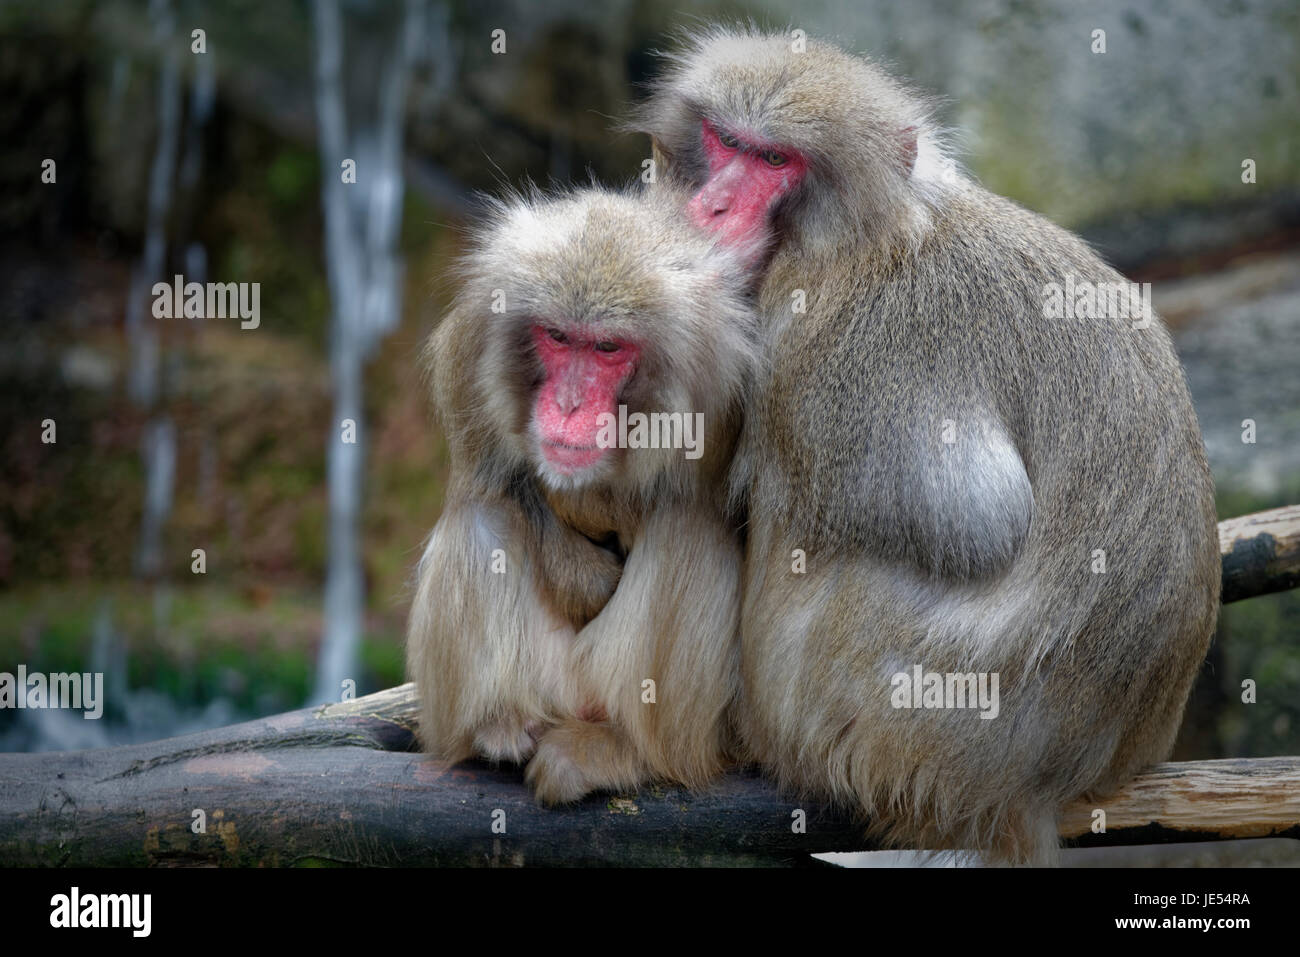 Japanese macaques (Macaca fuscata) are warming each other by sitting closely together. Stock Photo